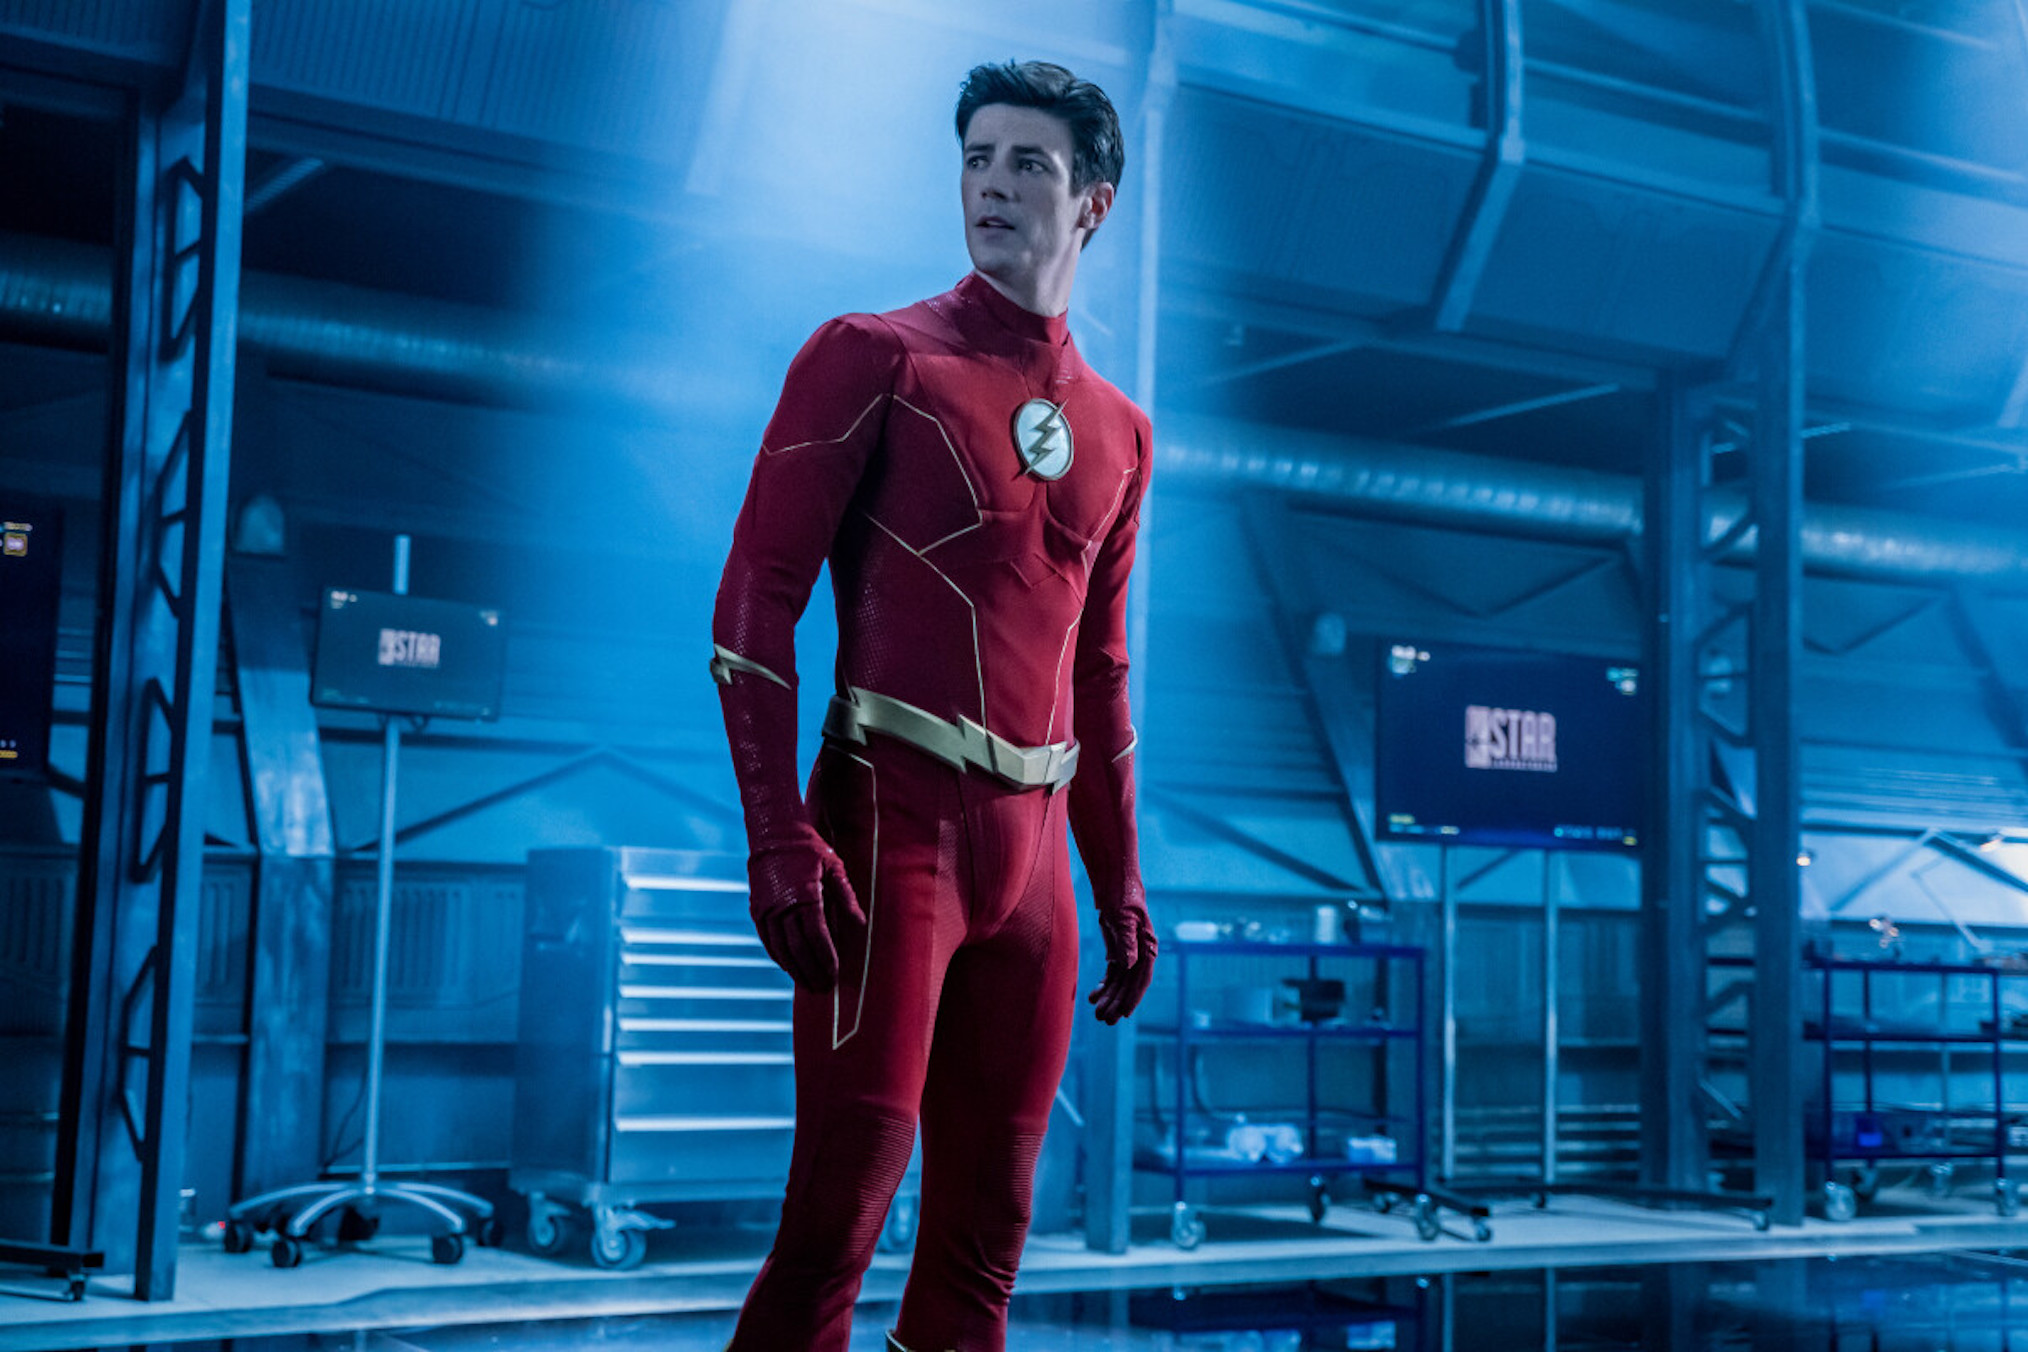 A New Fake Of Grant Gustin (aka The Flash). This W...